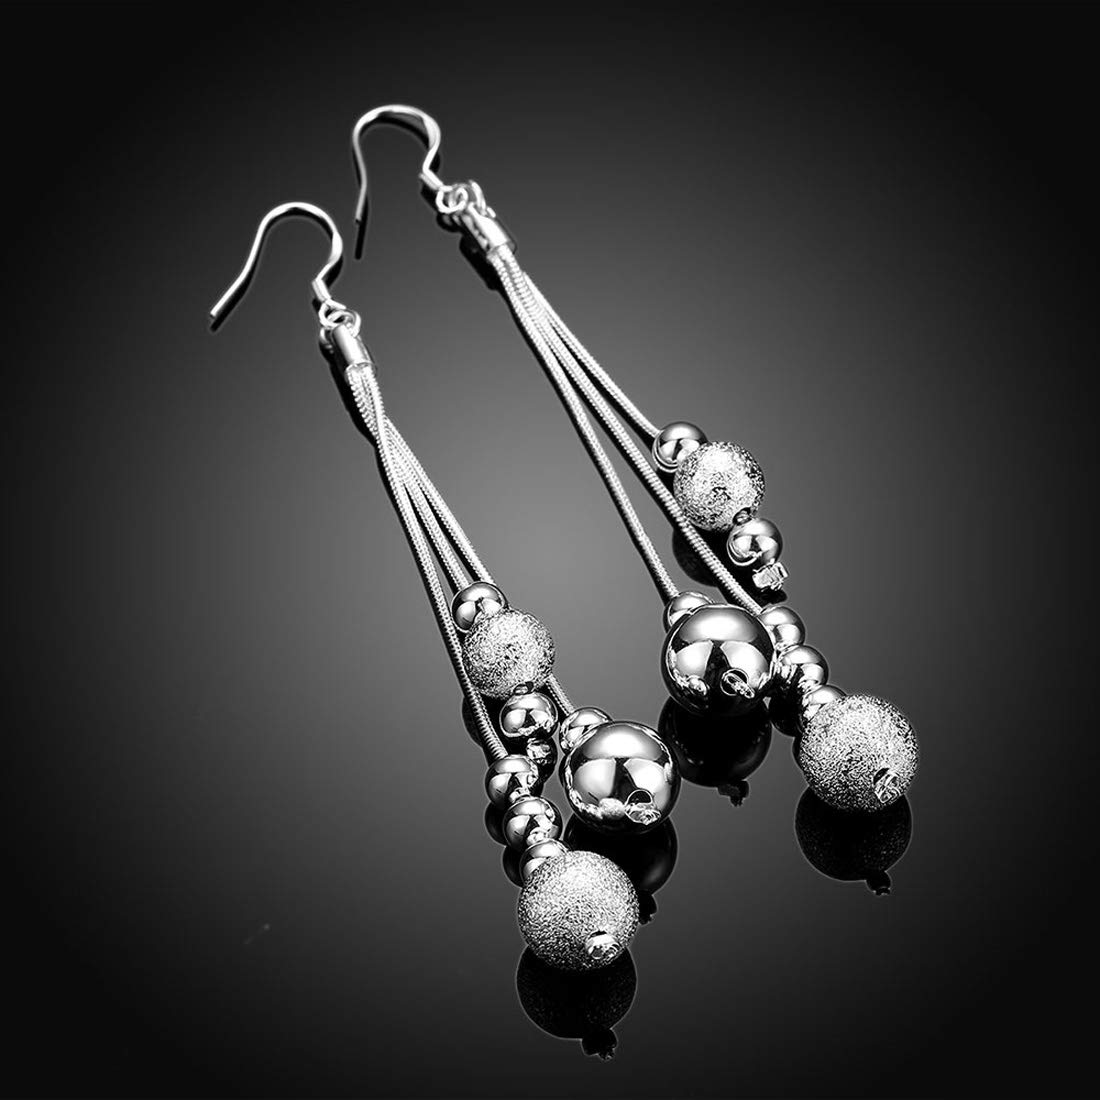 Yellow Chimes Earrings for Women and Girls Silver Dangler Earrings | Silver Toned Threads with Beads Long Chain Danglers Earrings for Women | Birthday Gift for girls and women Anniversary Gift for Wife